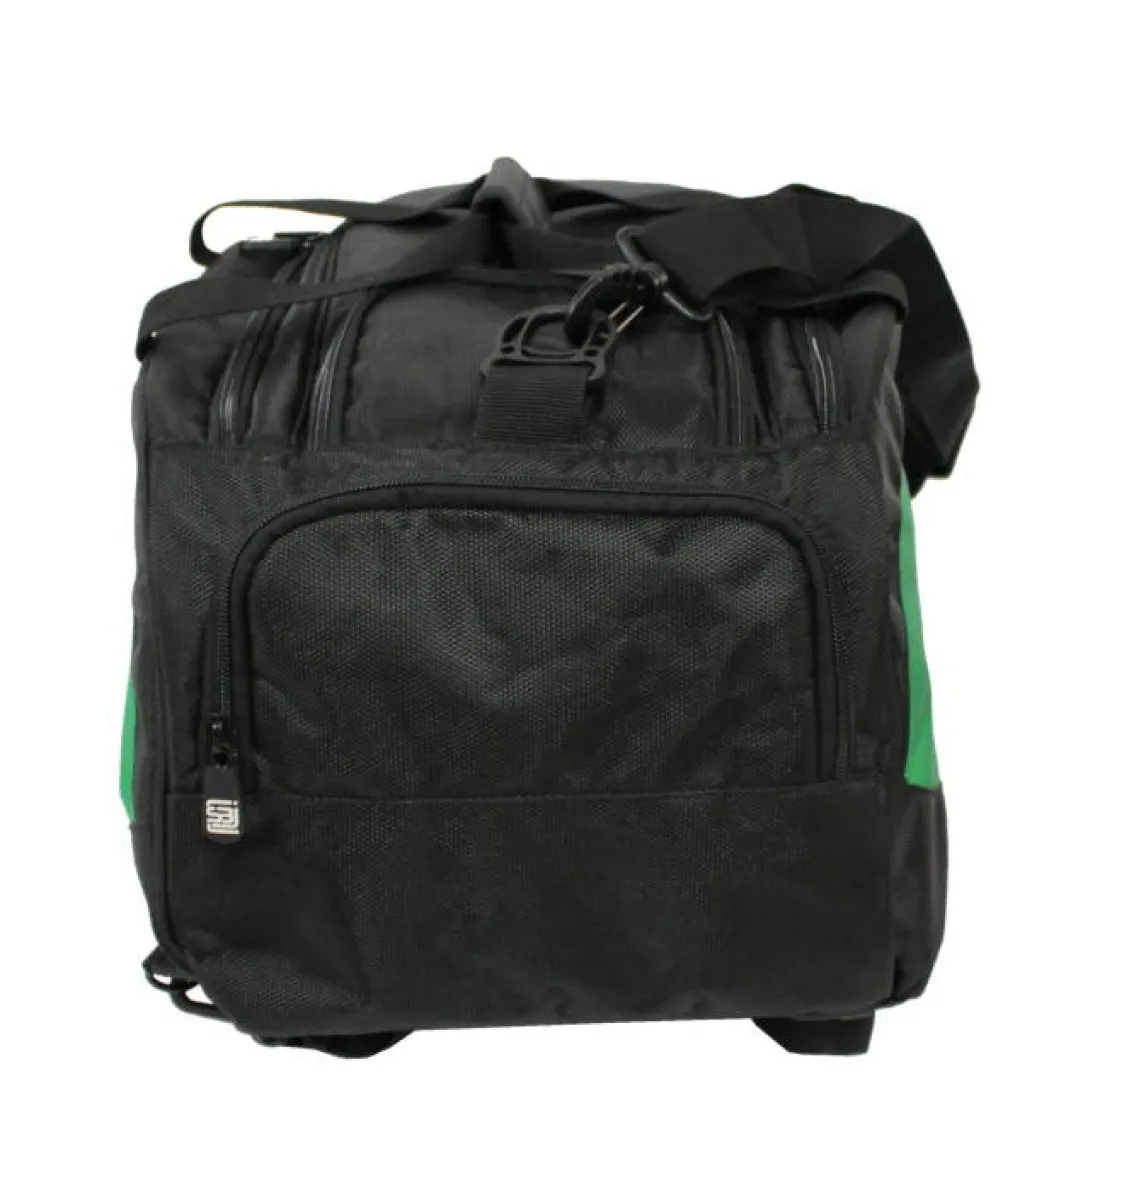 Sports bag with rucksack function in black with turquoise side inserts